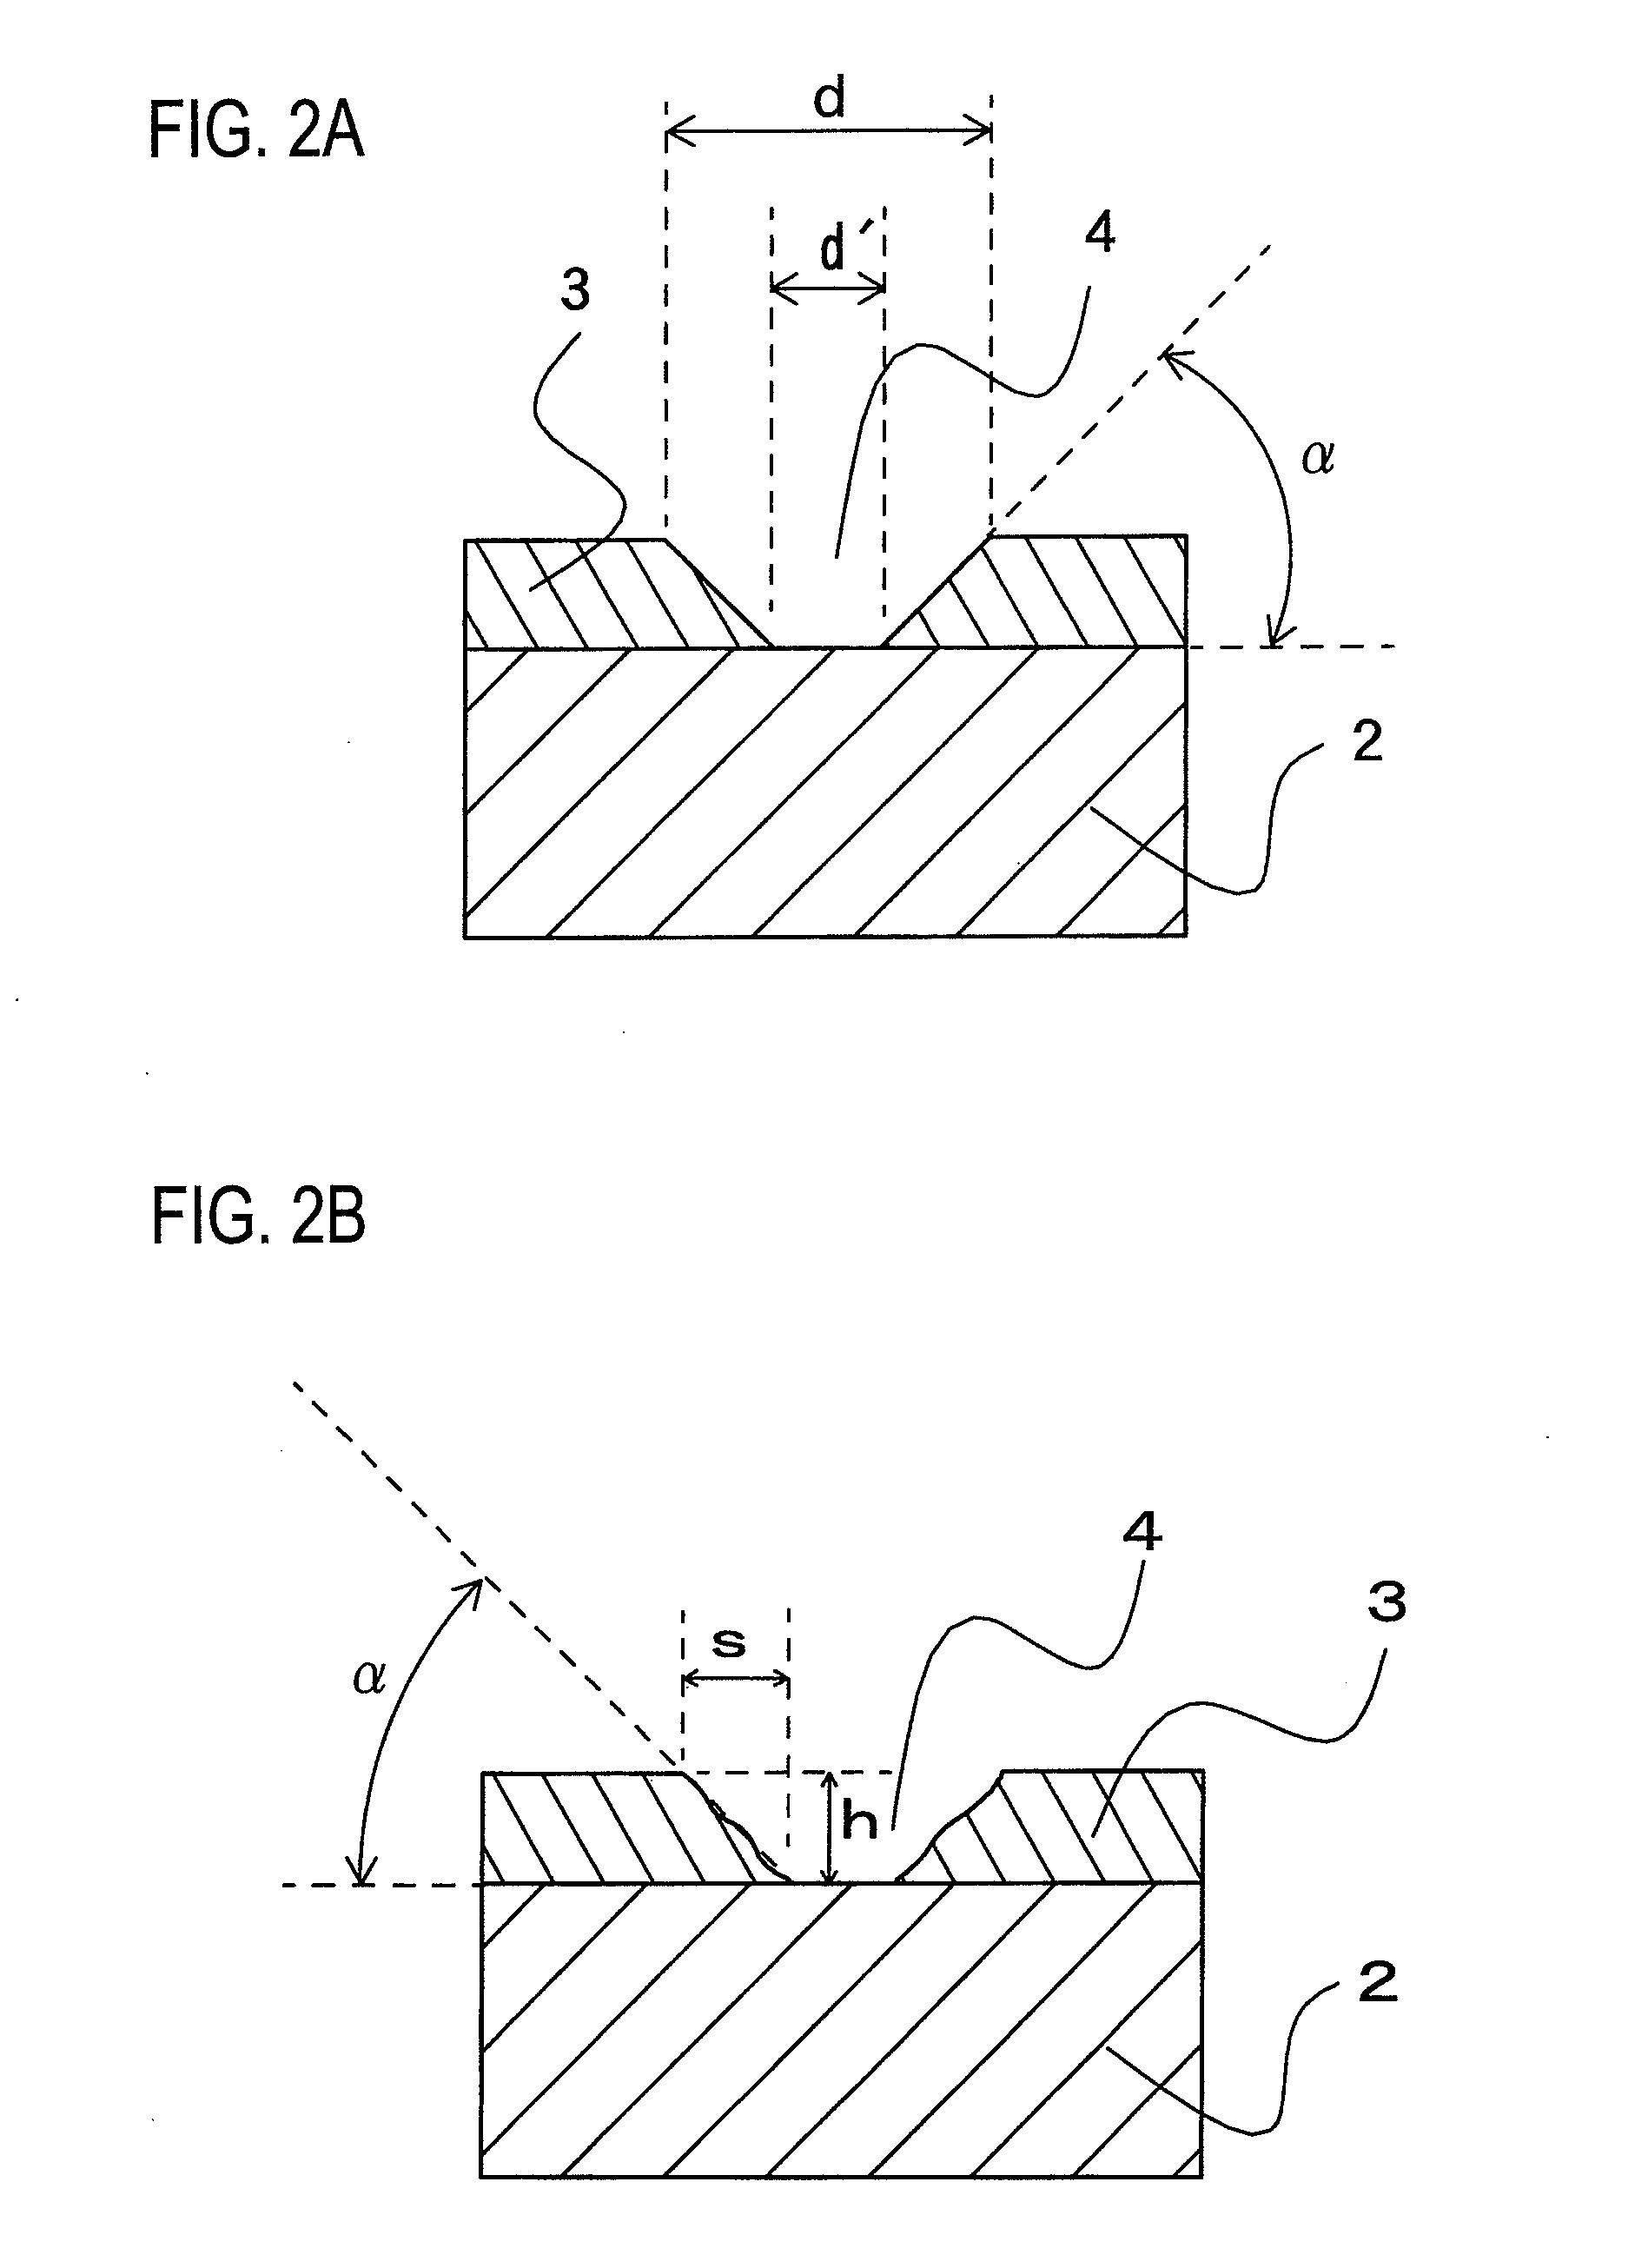 Engraved plate and substrate with conductor layer pattern using the same